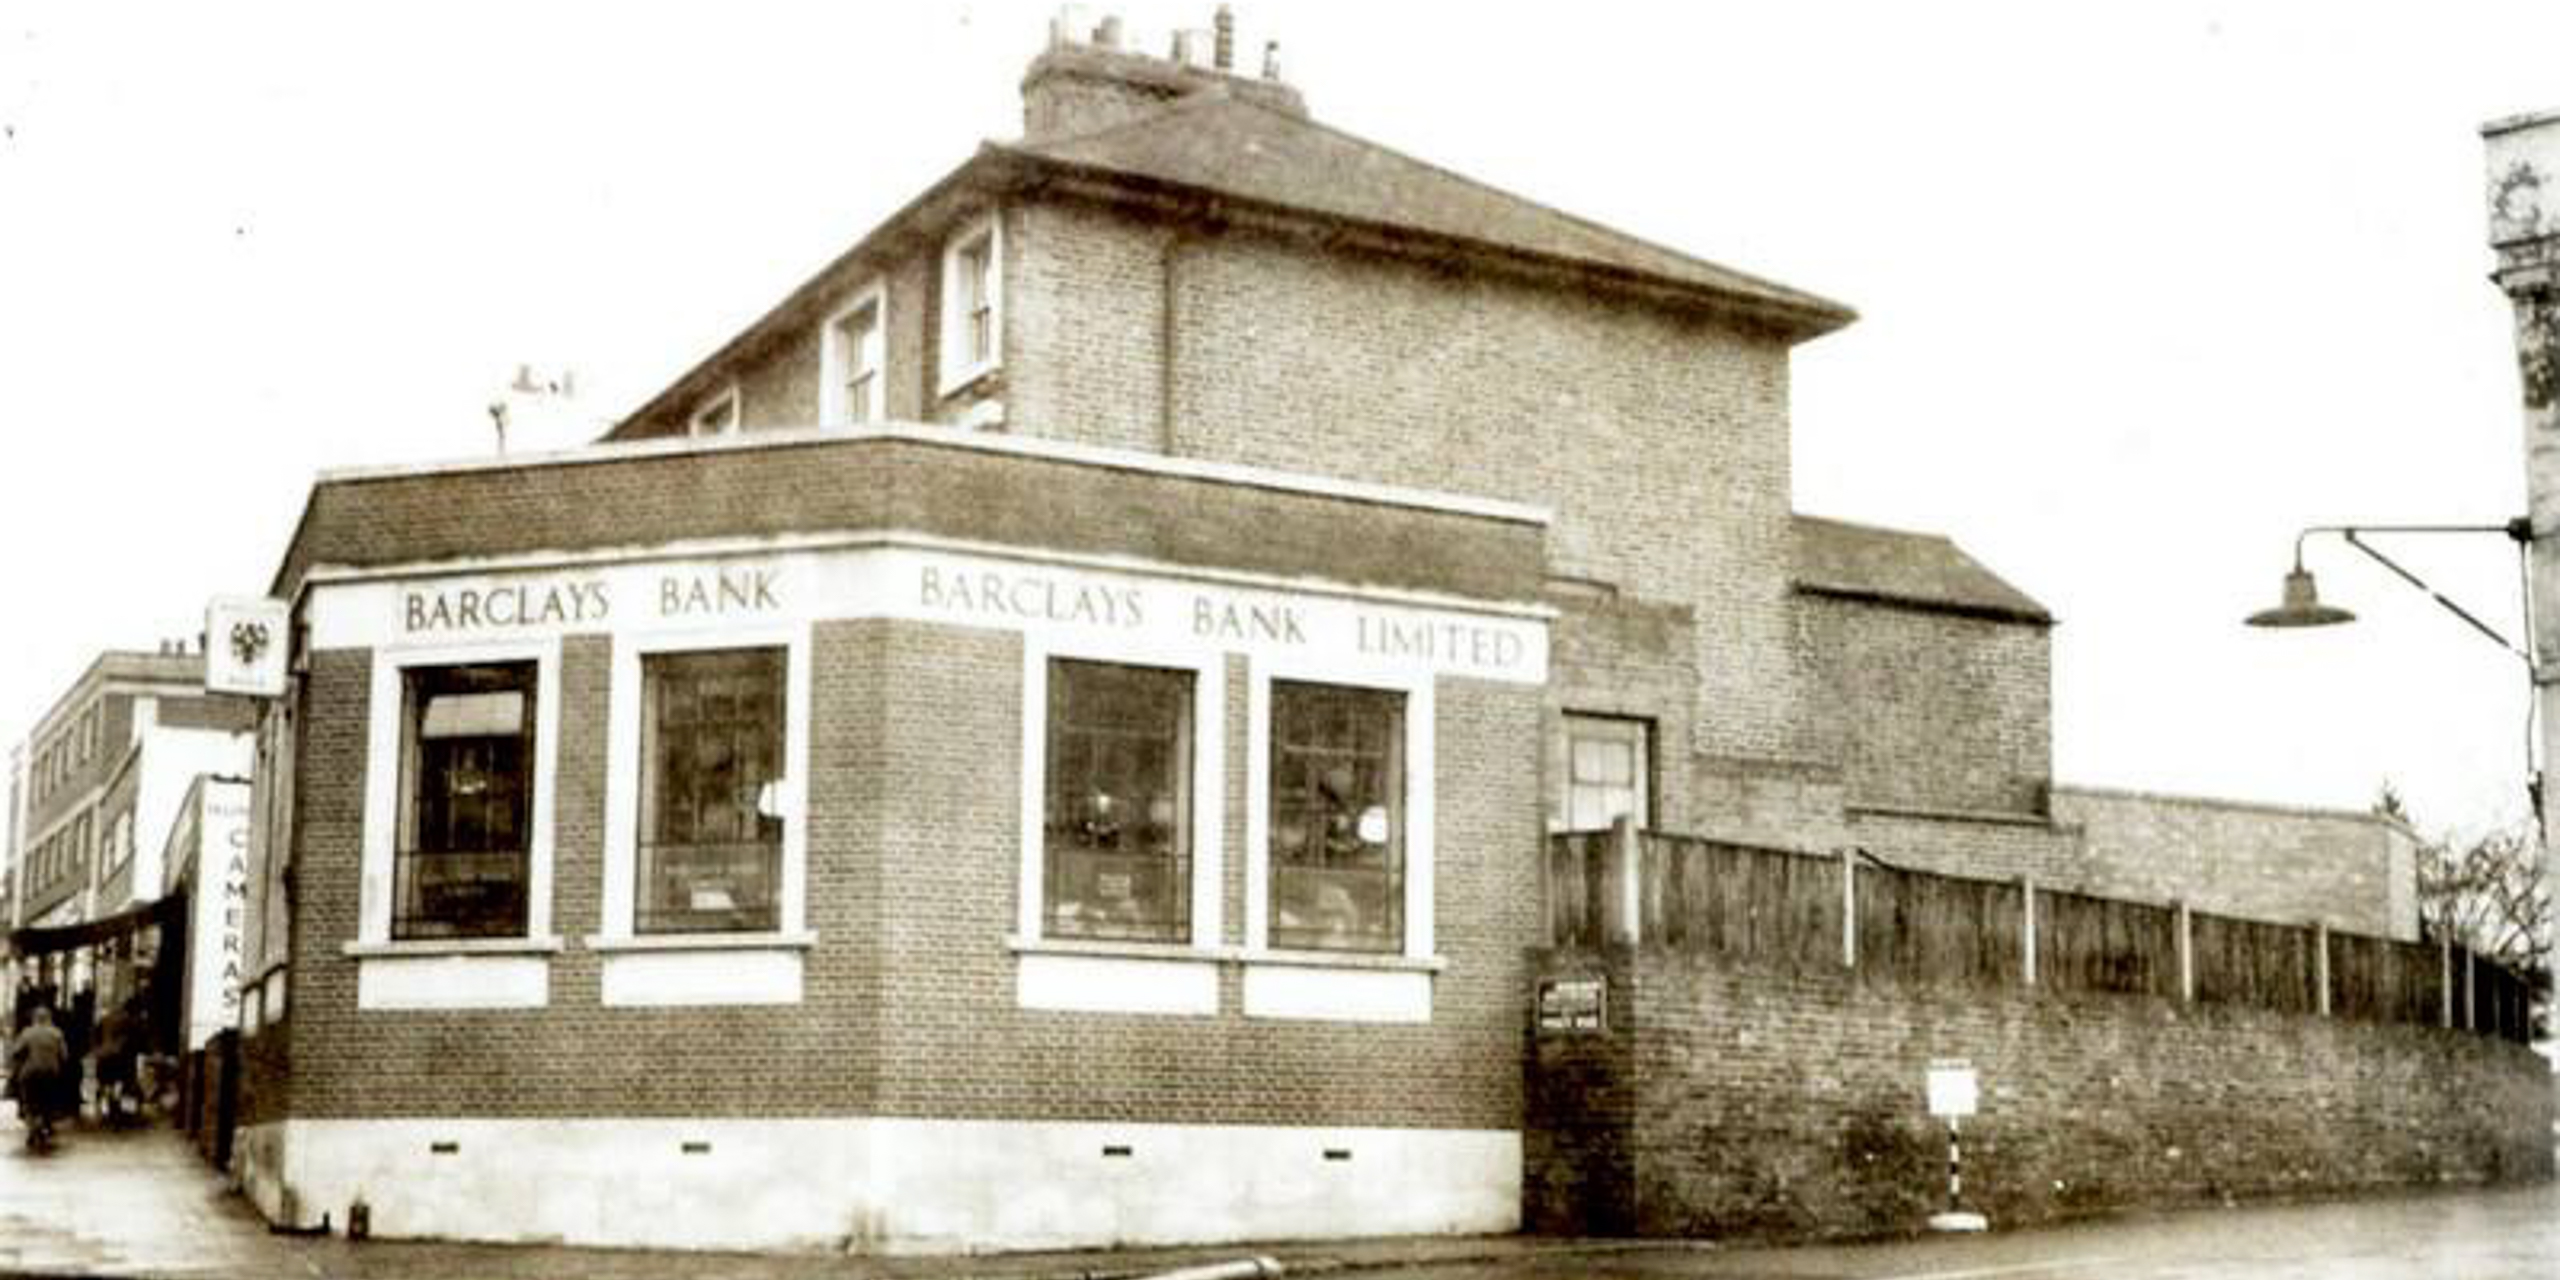 Now & Then - Barclays Bank, High Street, Yiewsley - 2020 vs c.1950